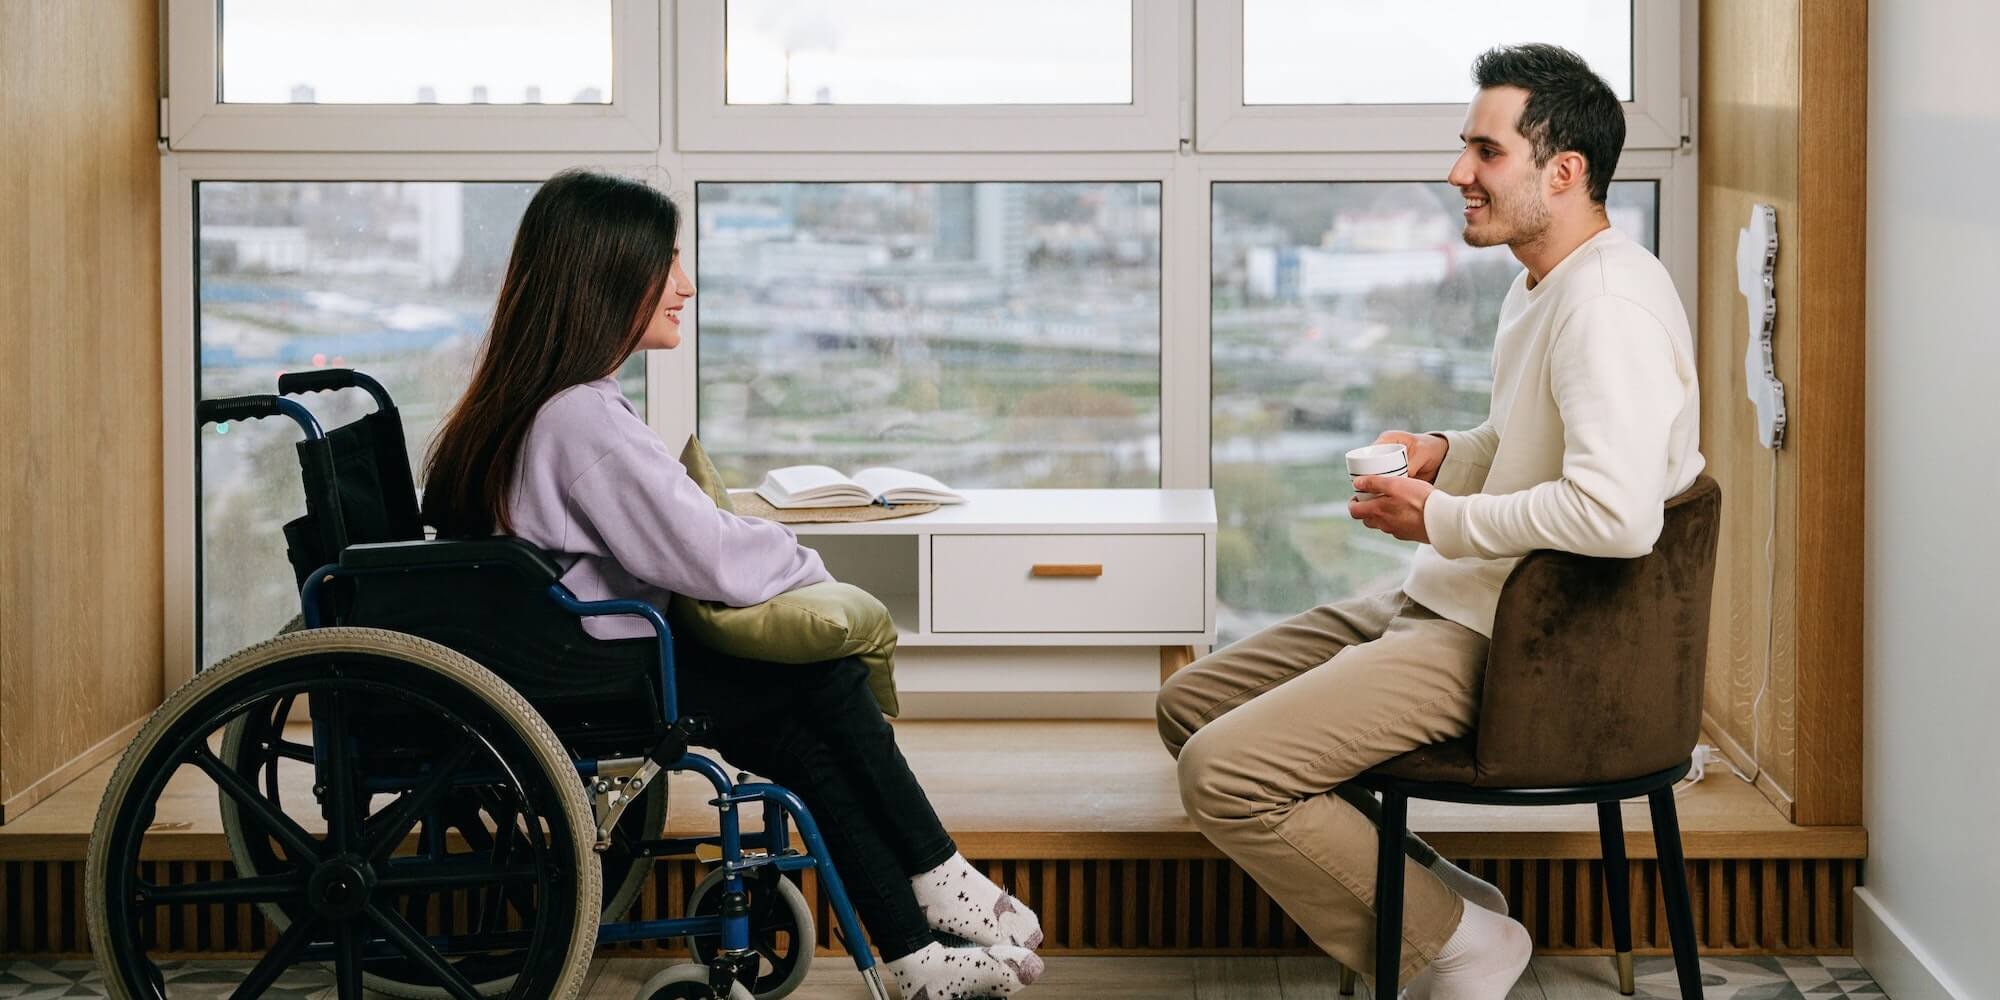 A PA chatting with a young lady in a wheelchair over coffee (image from Pexels by Ivan Samkov)